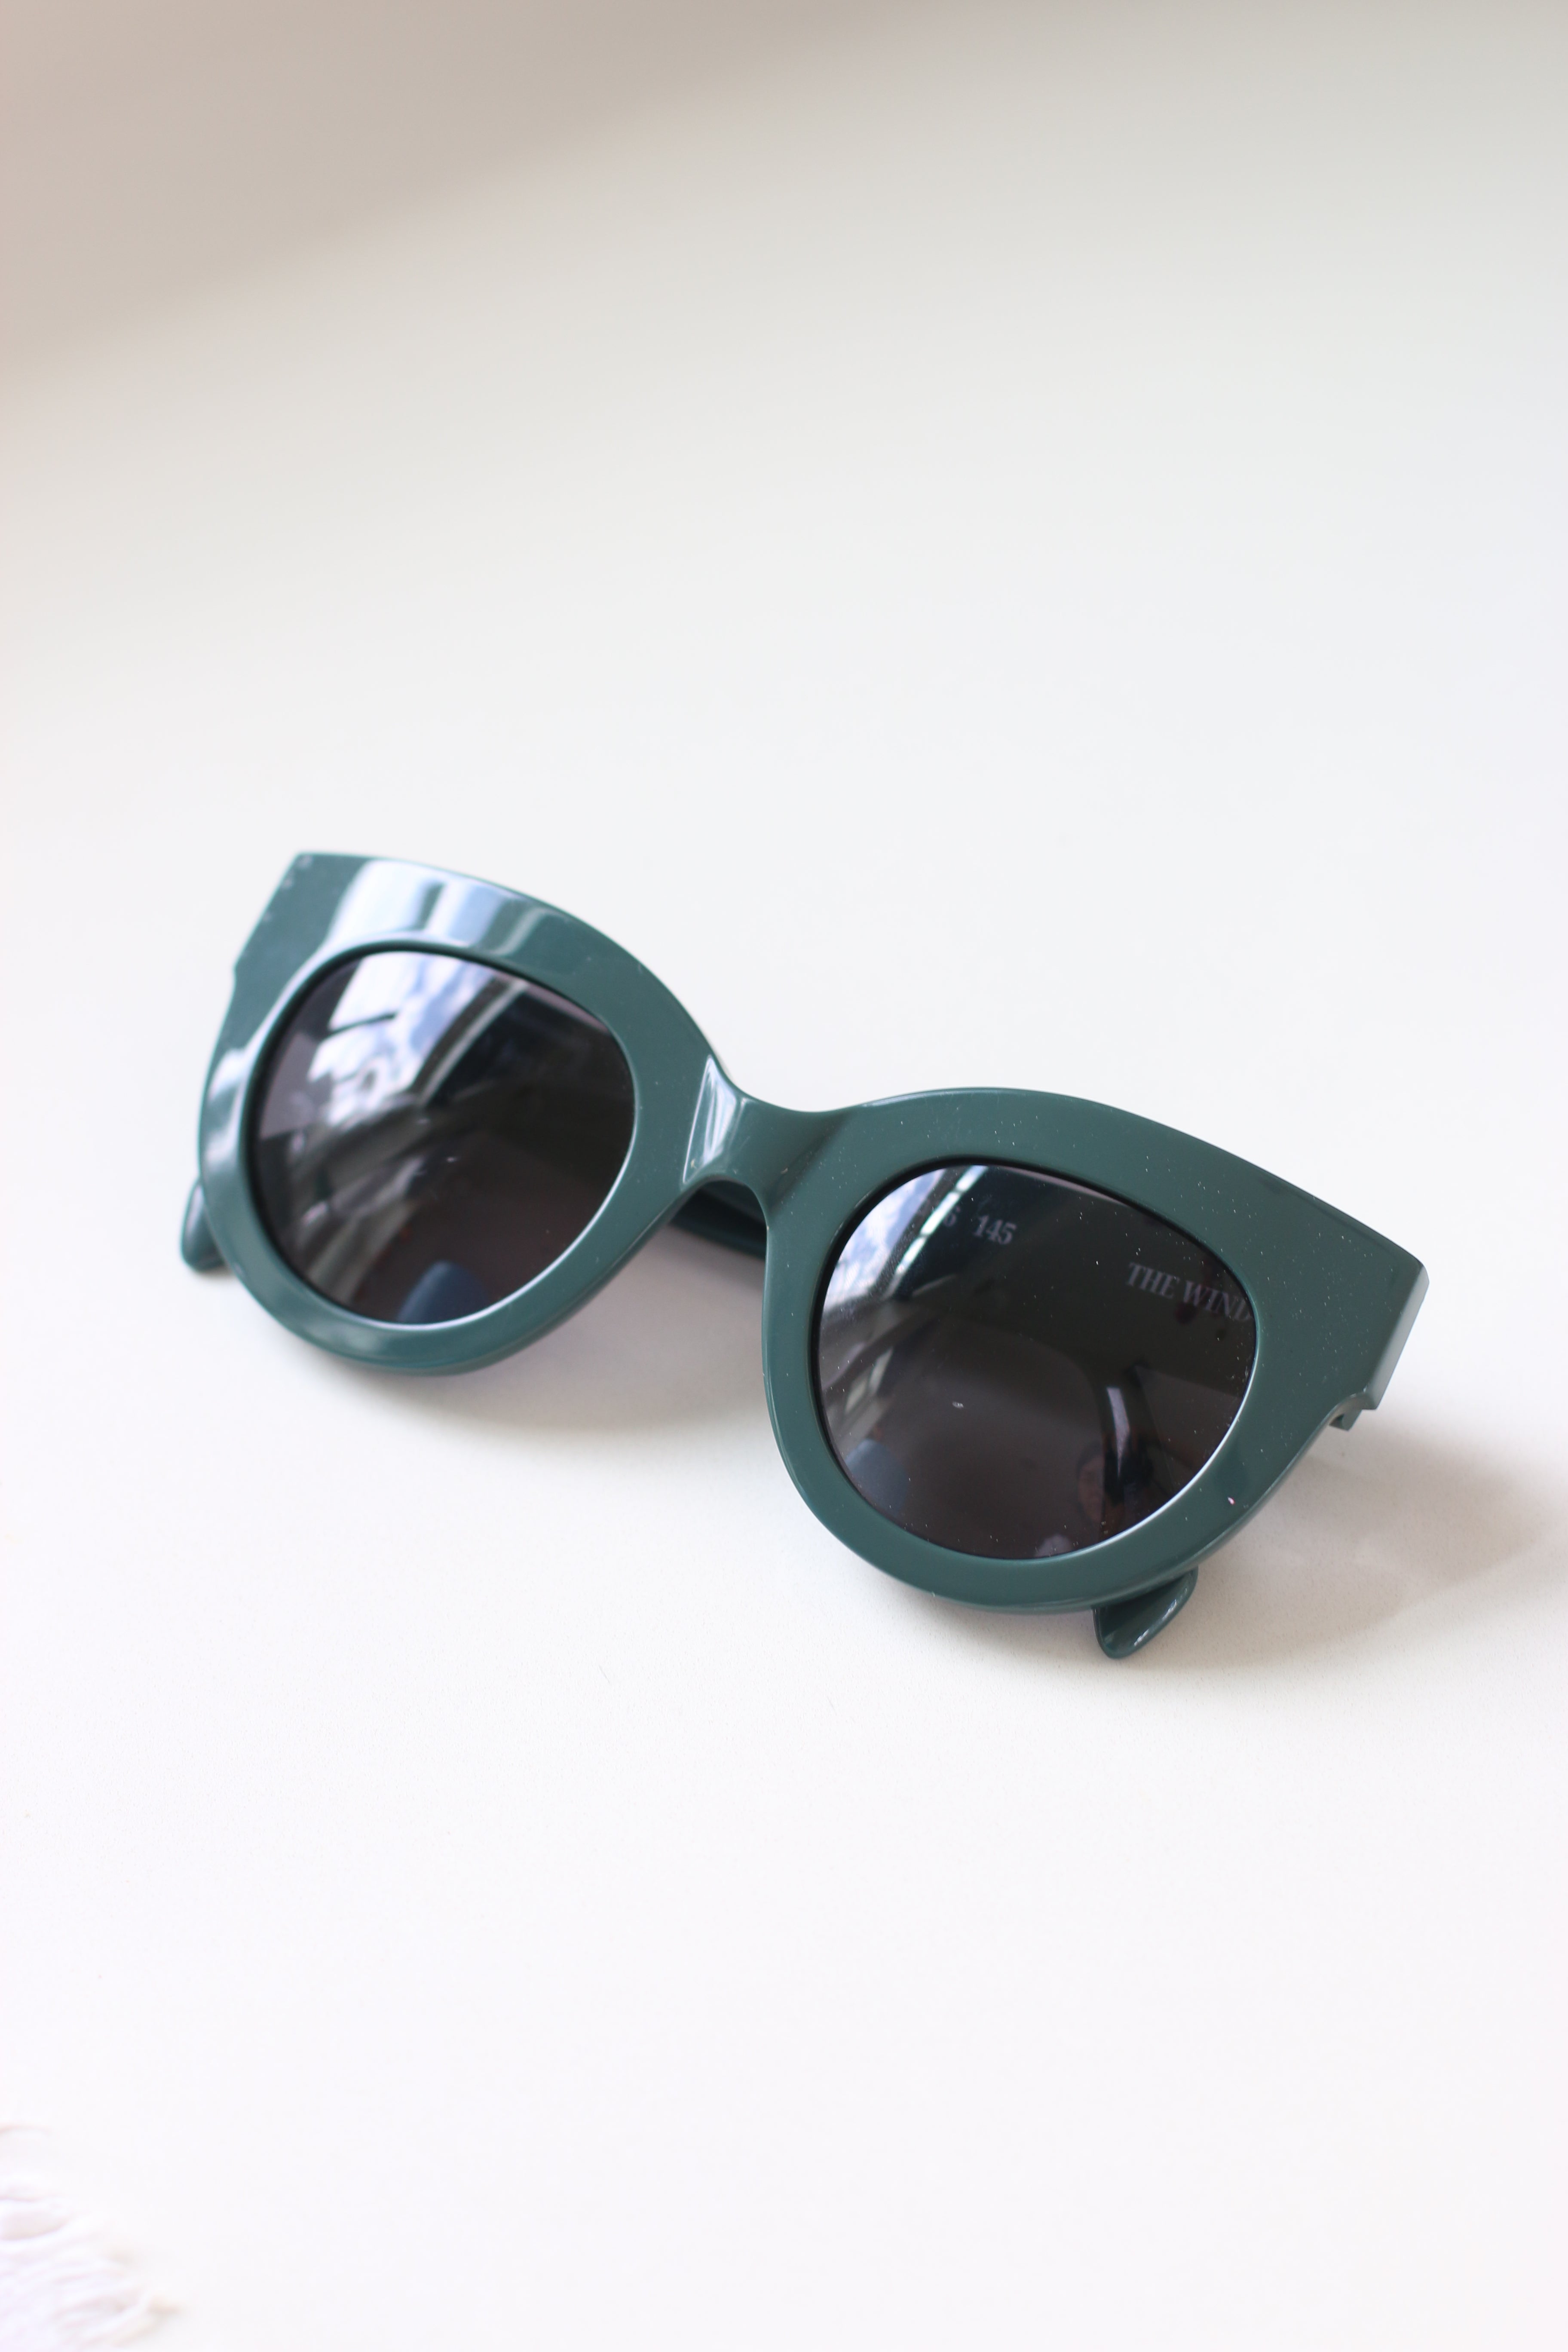 ANEA HILL The Wind: Luxury green sunglasses return with polarized lenses for exceptional clarity.